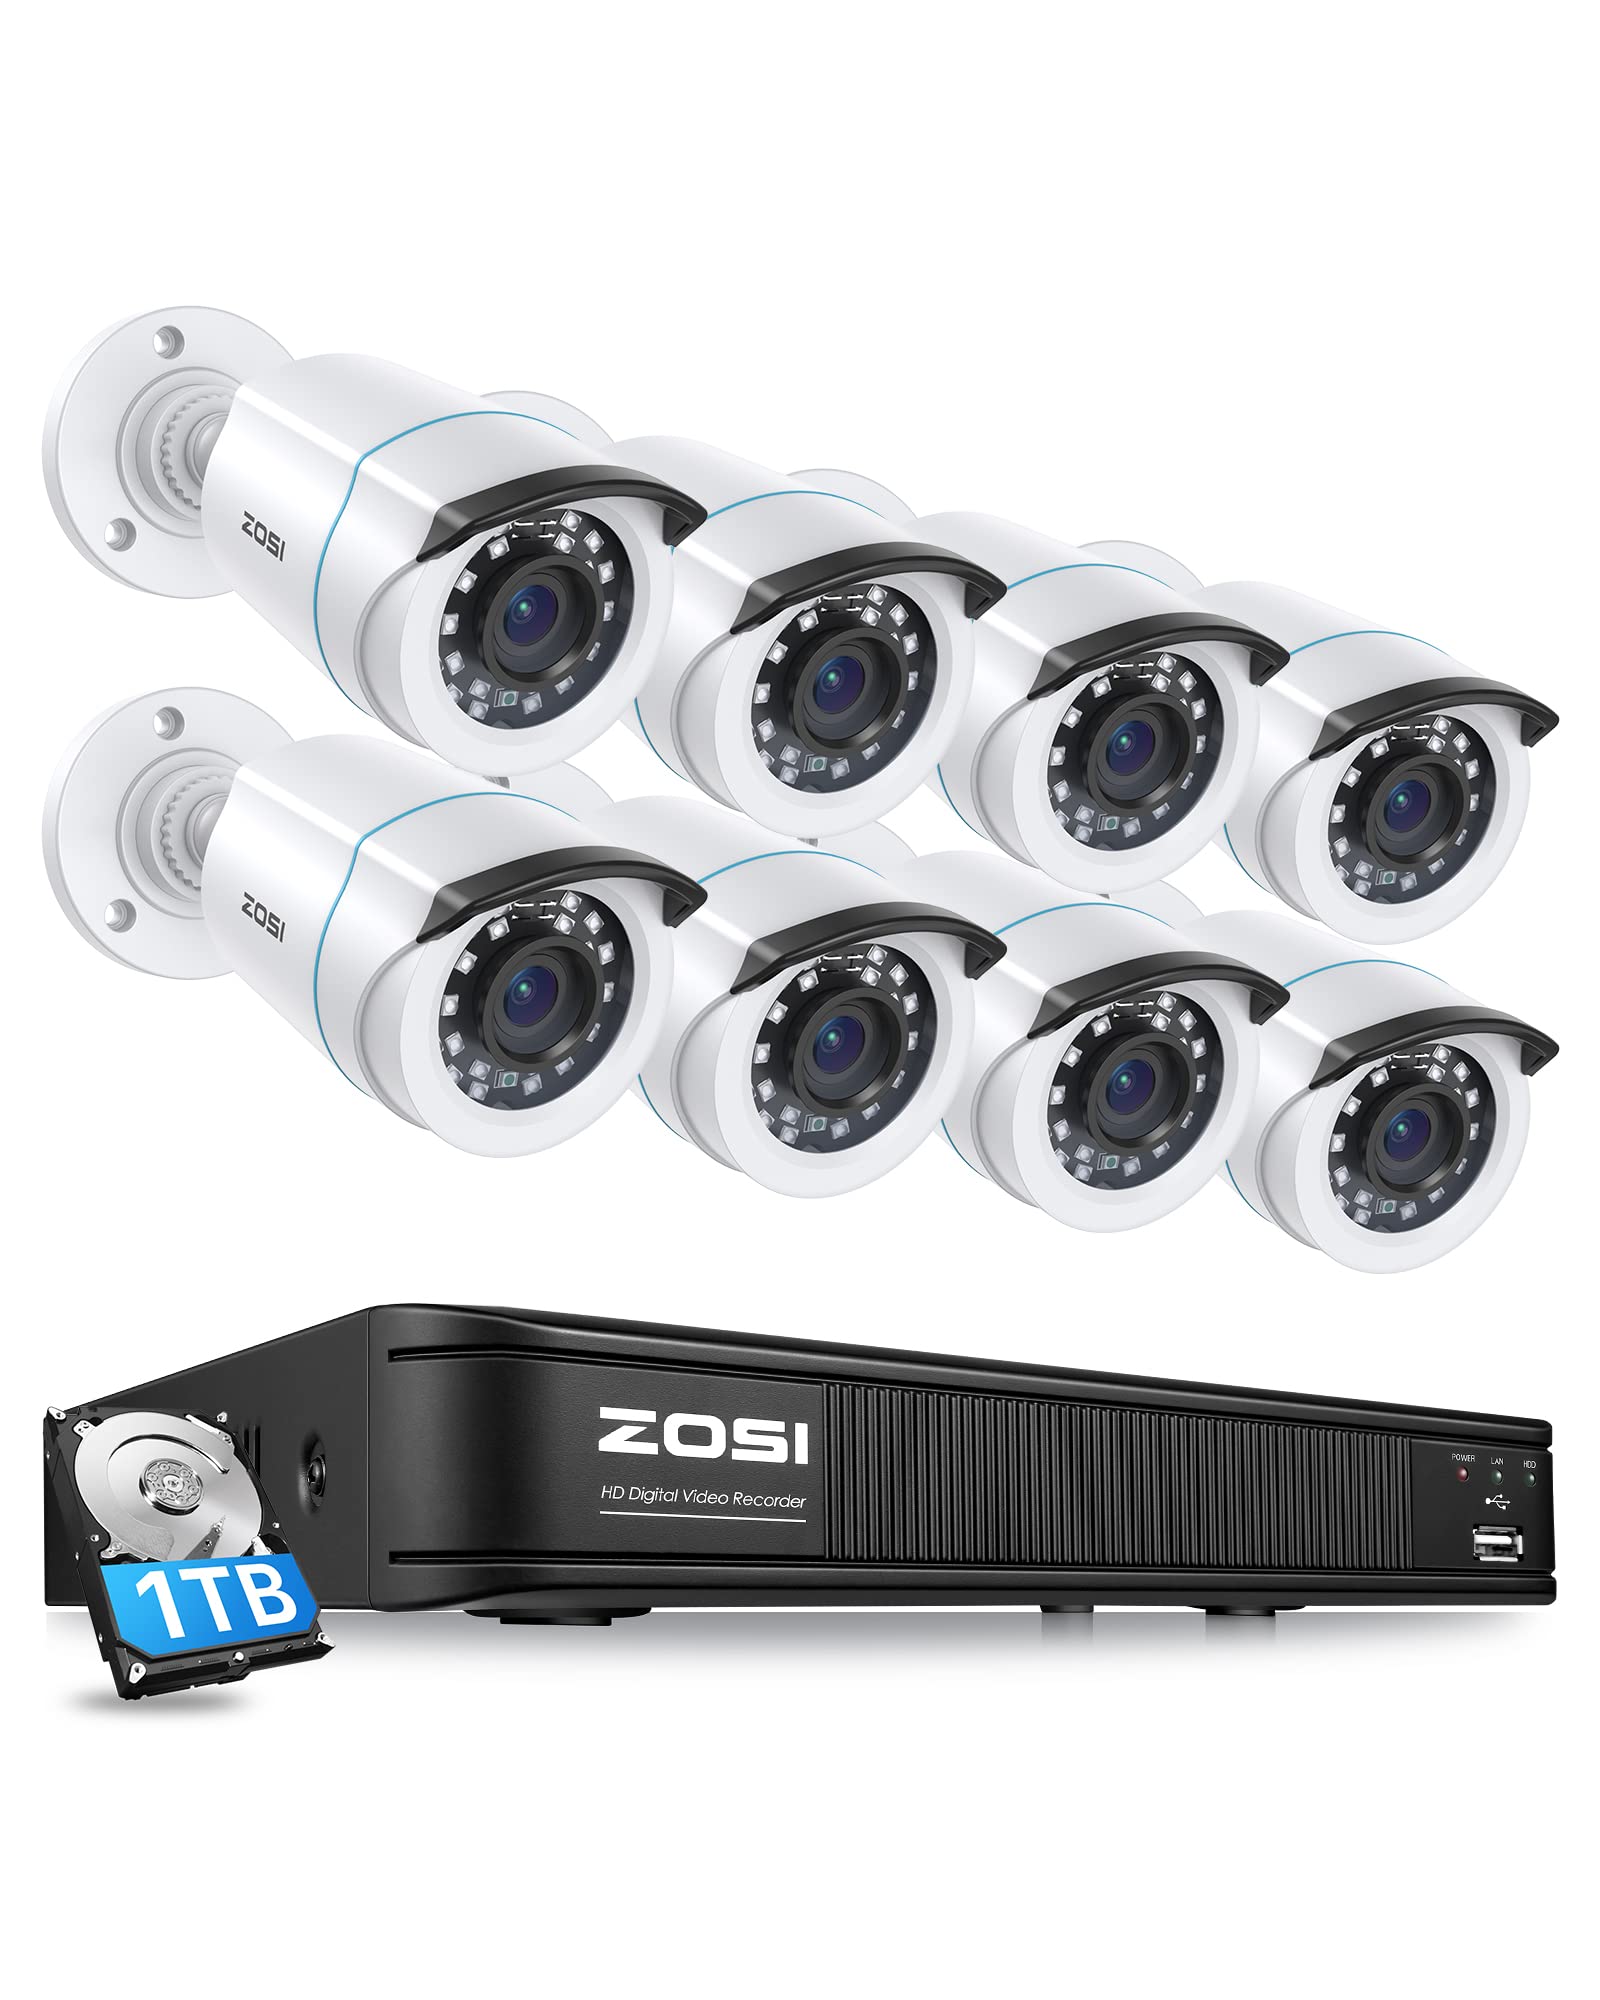 ZOSI 1080P H.265+ Home Security Camera System,5MP Lite 8 Channel CCTV DVR Recorder with Hard Drive 1TB and 8 x 1080p Weatherproof Bullet Camera Outdoor Indoor with 80ft Night Vision, Motion Alerts